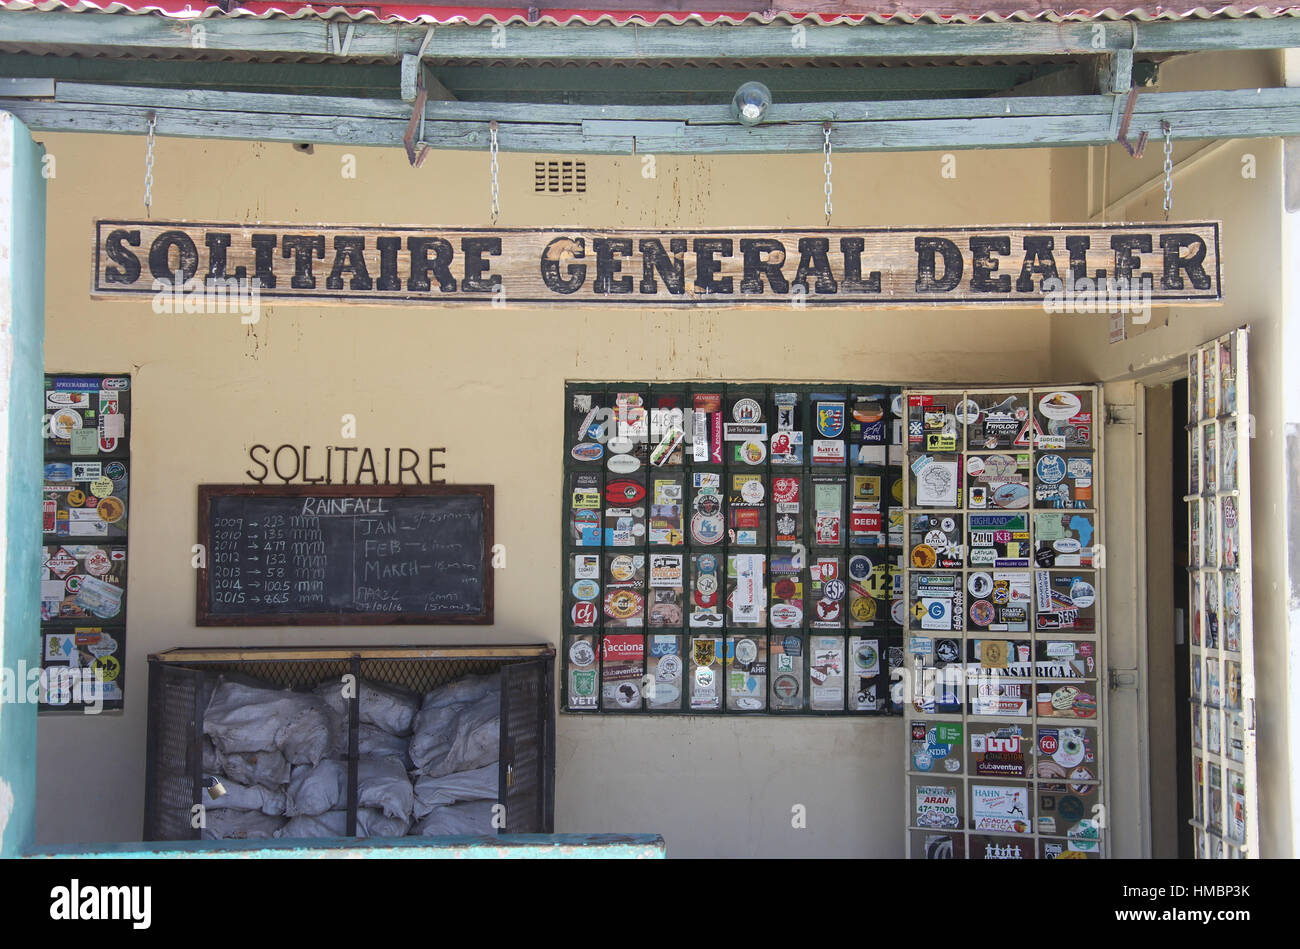 Solitaire General Dealer in Namibia Stock Photo